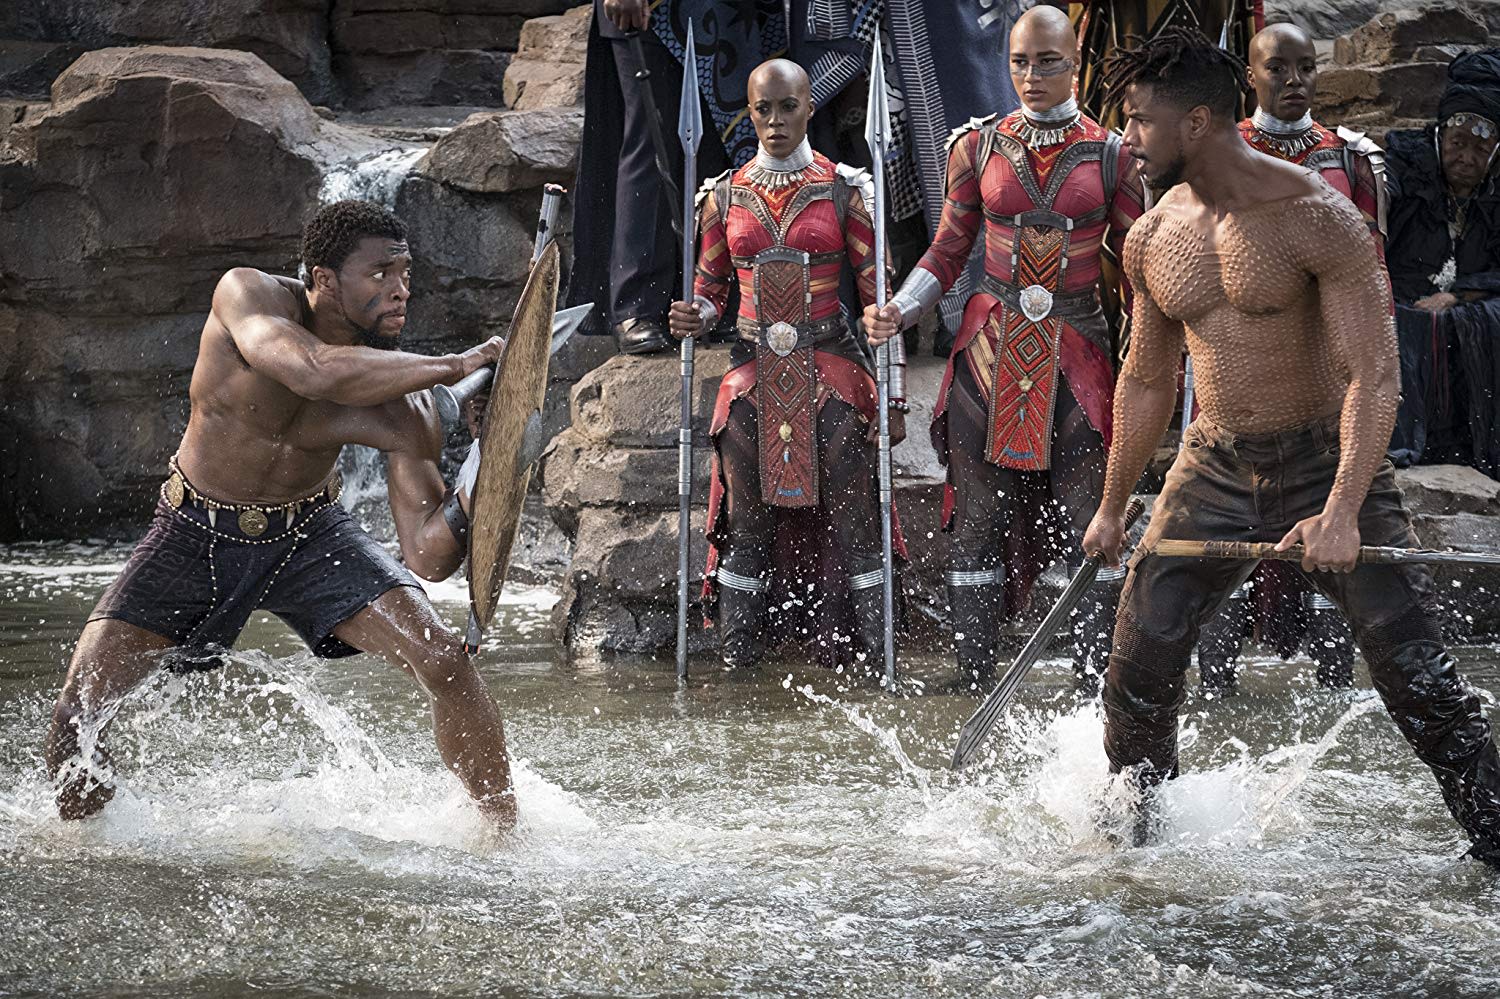 Actors Chadwick Boseman and Michael B. Jordan from the film "Black Panther" stand in shallow water, holding weapons, and prepare to fight. Three women look on.